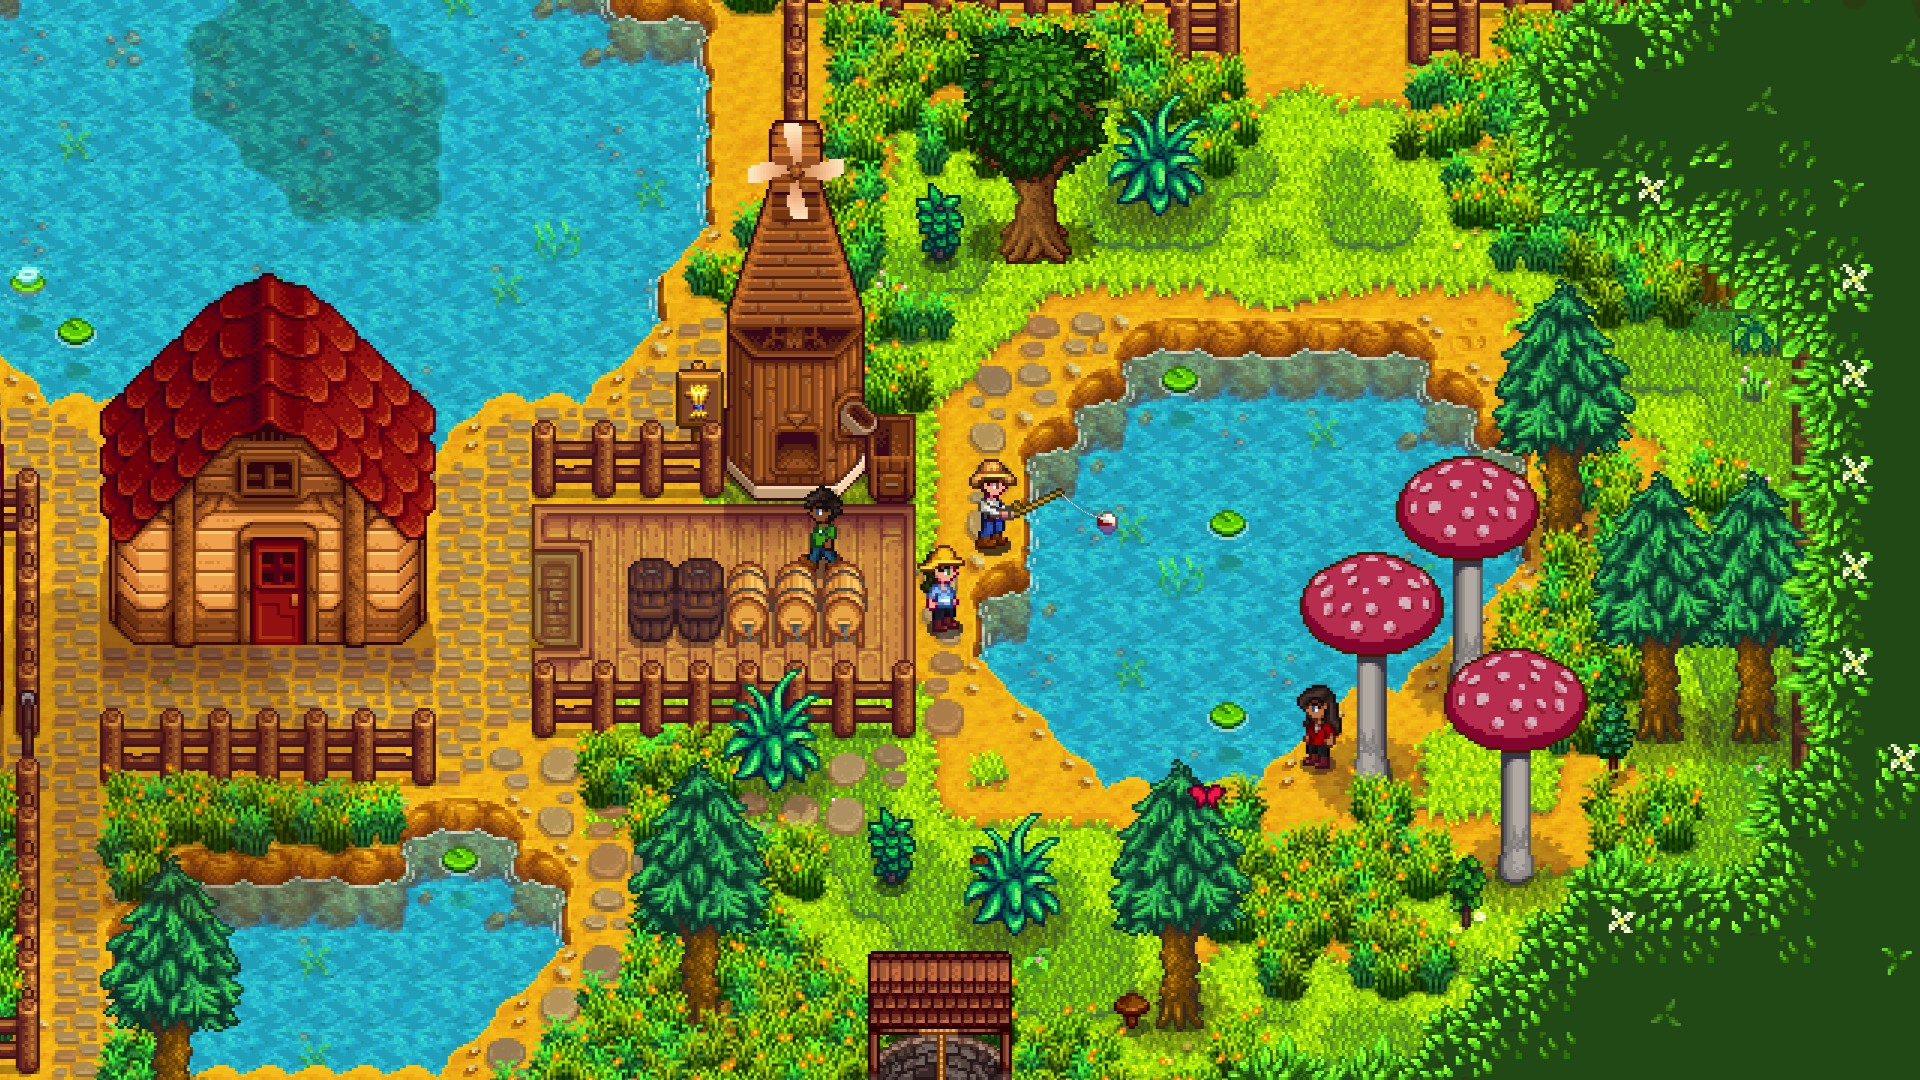 ConcernedApe made 'Stardew Valley' on his own -- three players fish together on their farm.